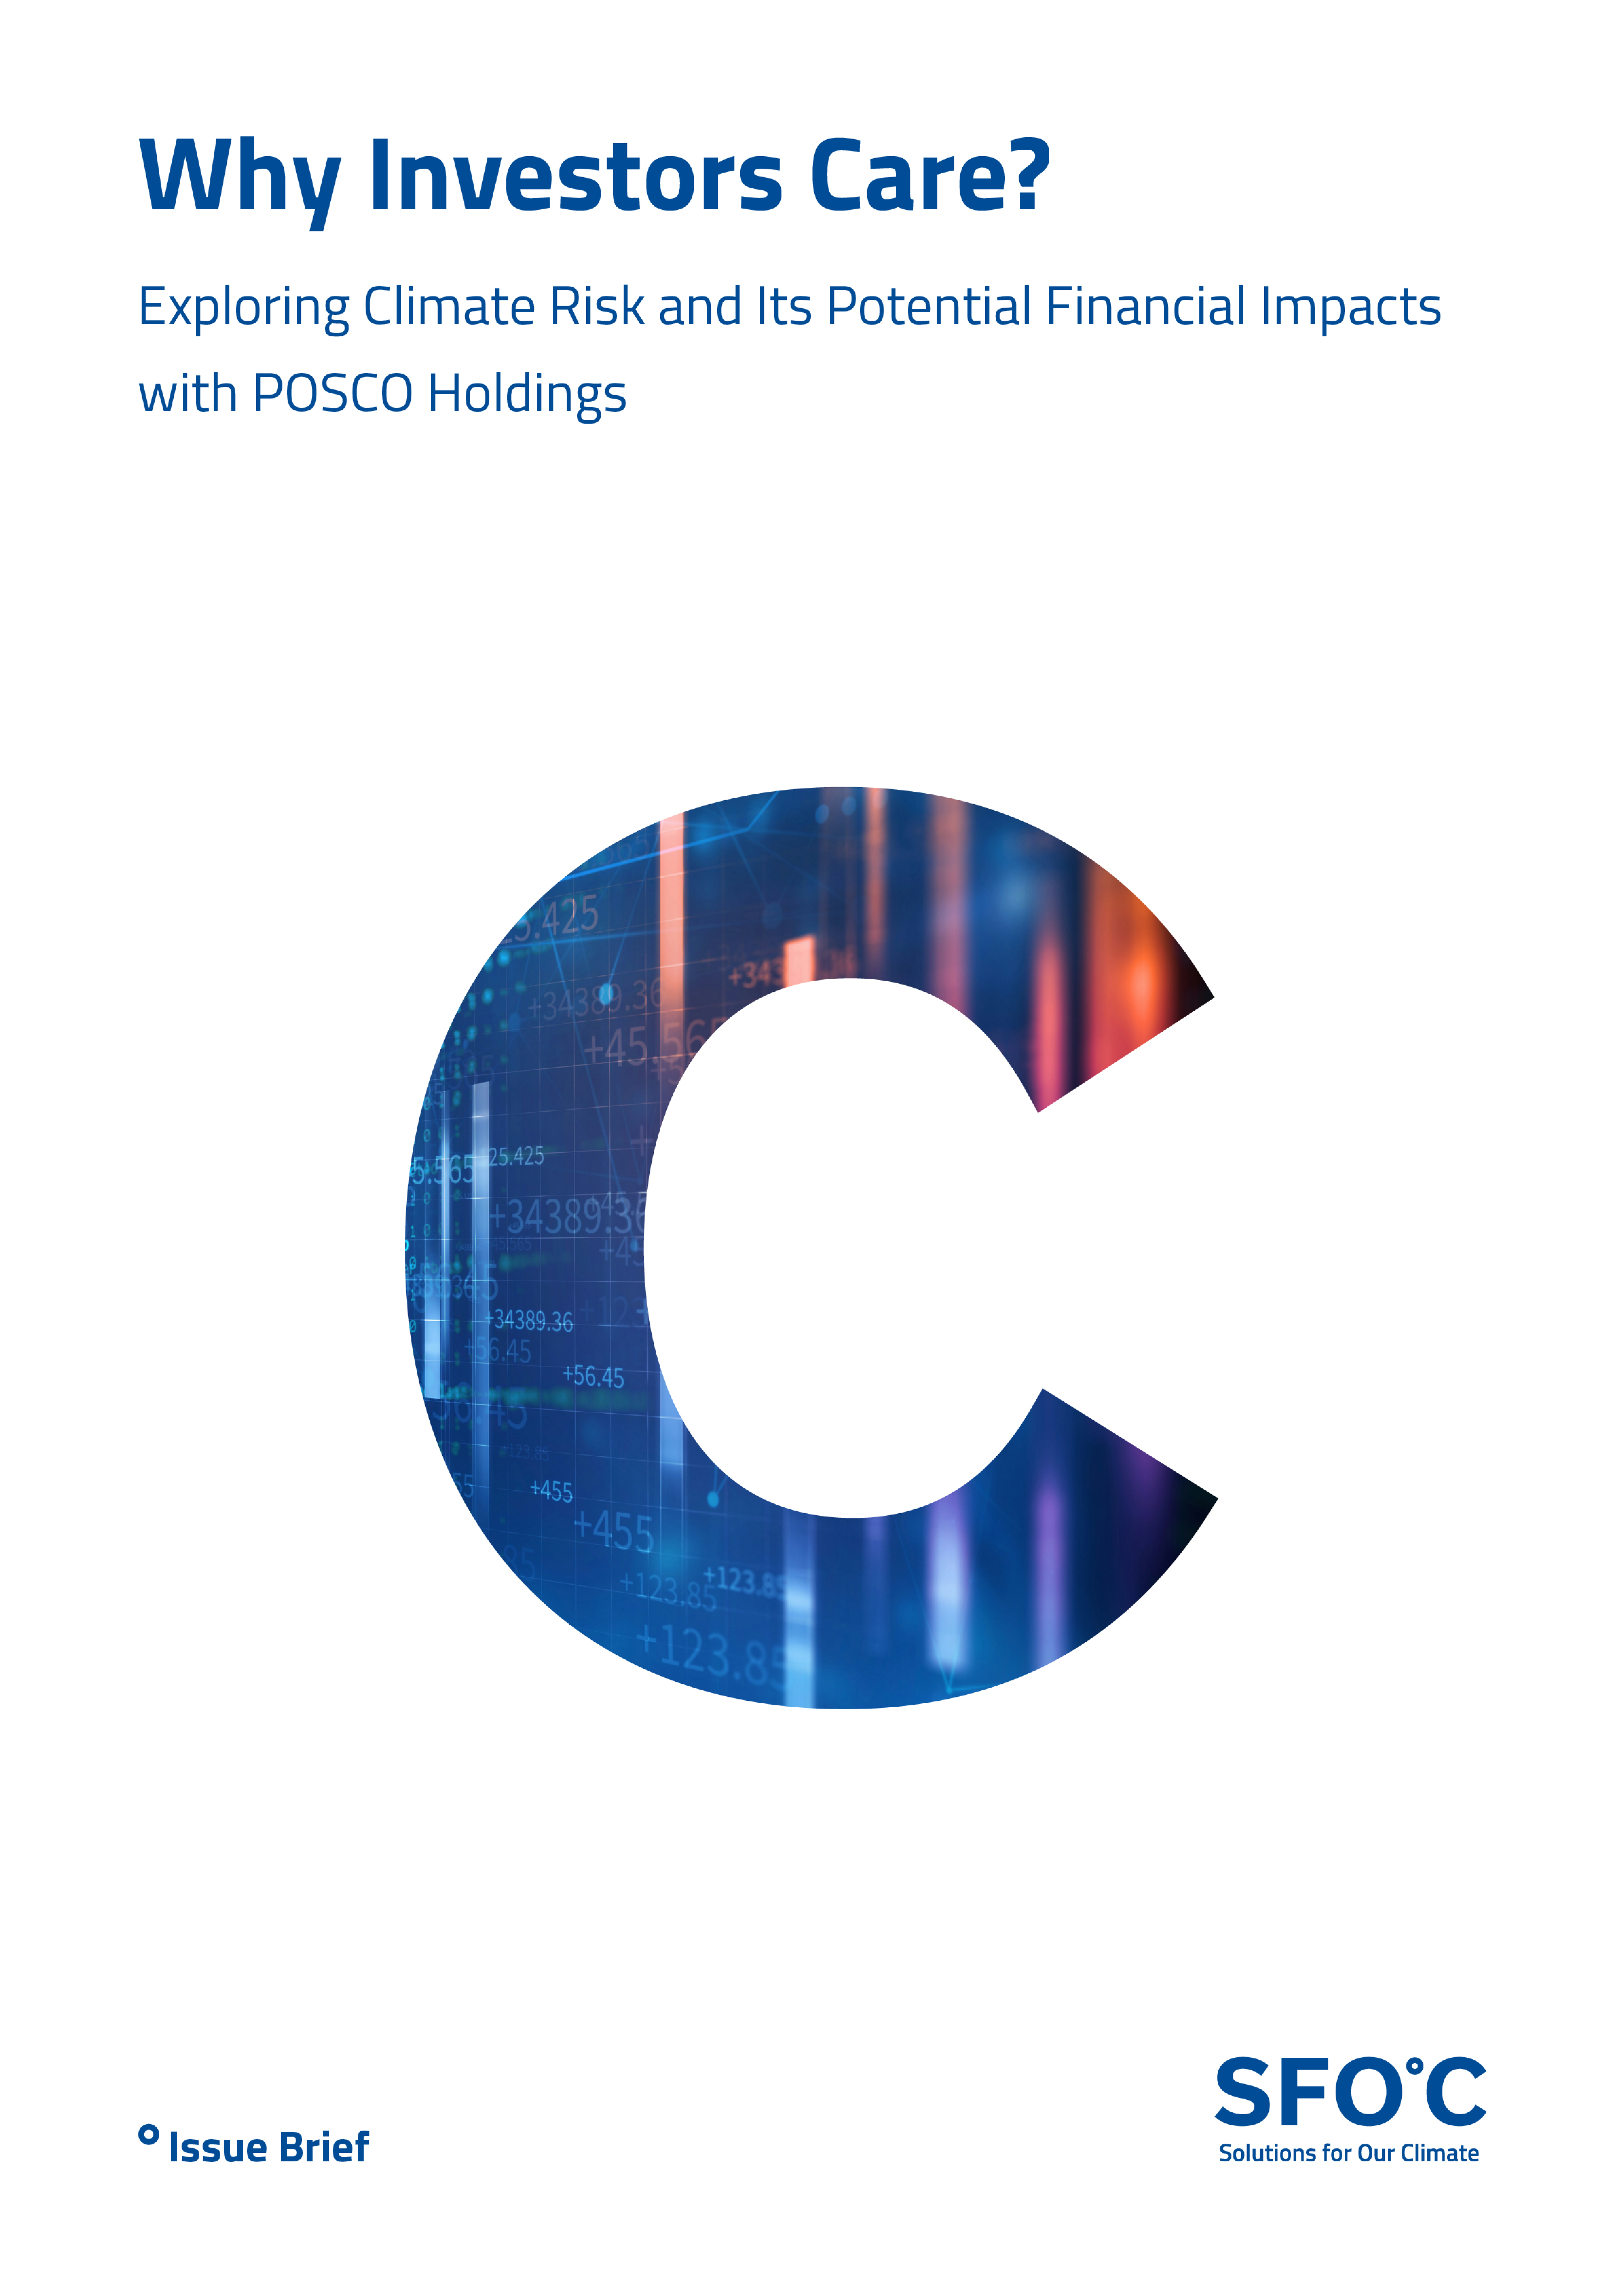 Exploring Climate Risk and Its Potential Financial Impacts with POSCO Holdings